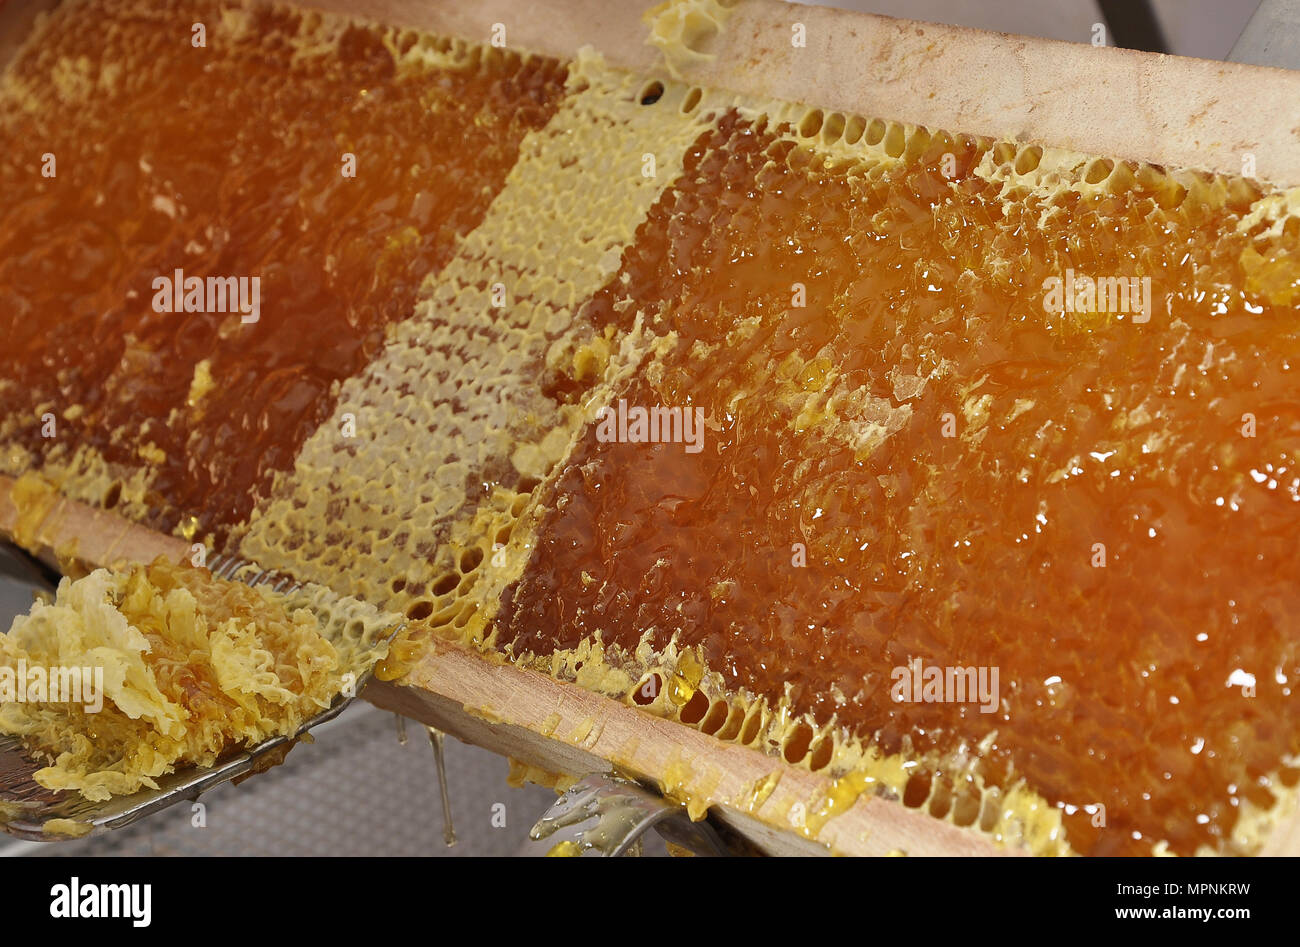 Uncapped honeycomb with uncapping fork Stock Photo